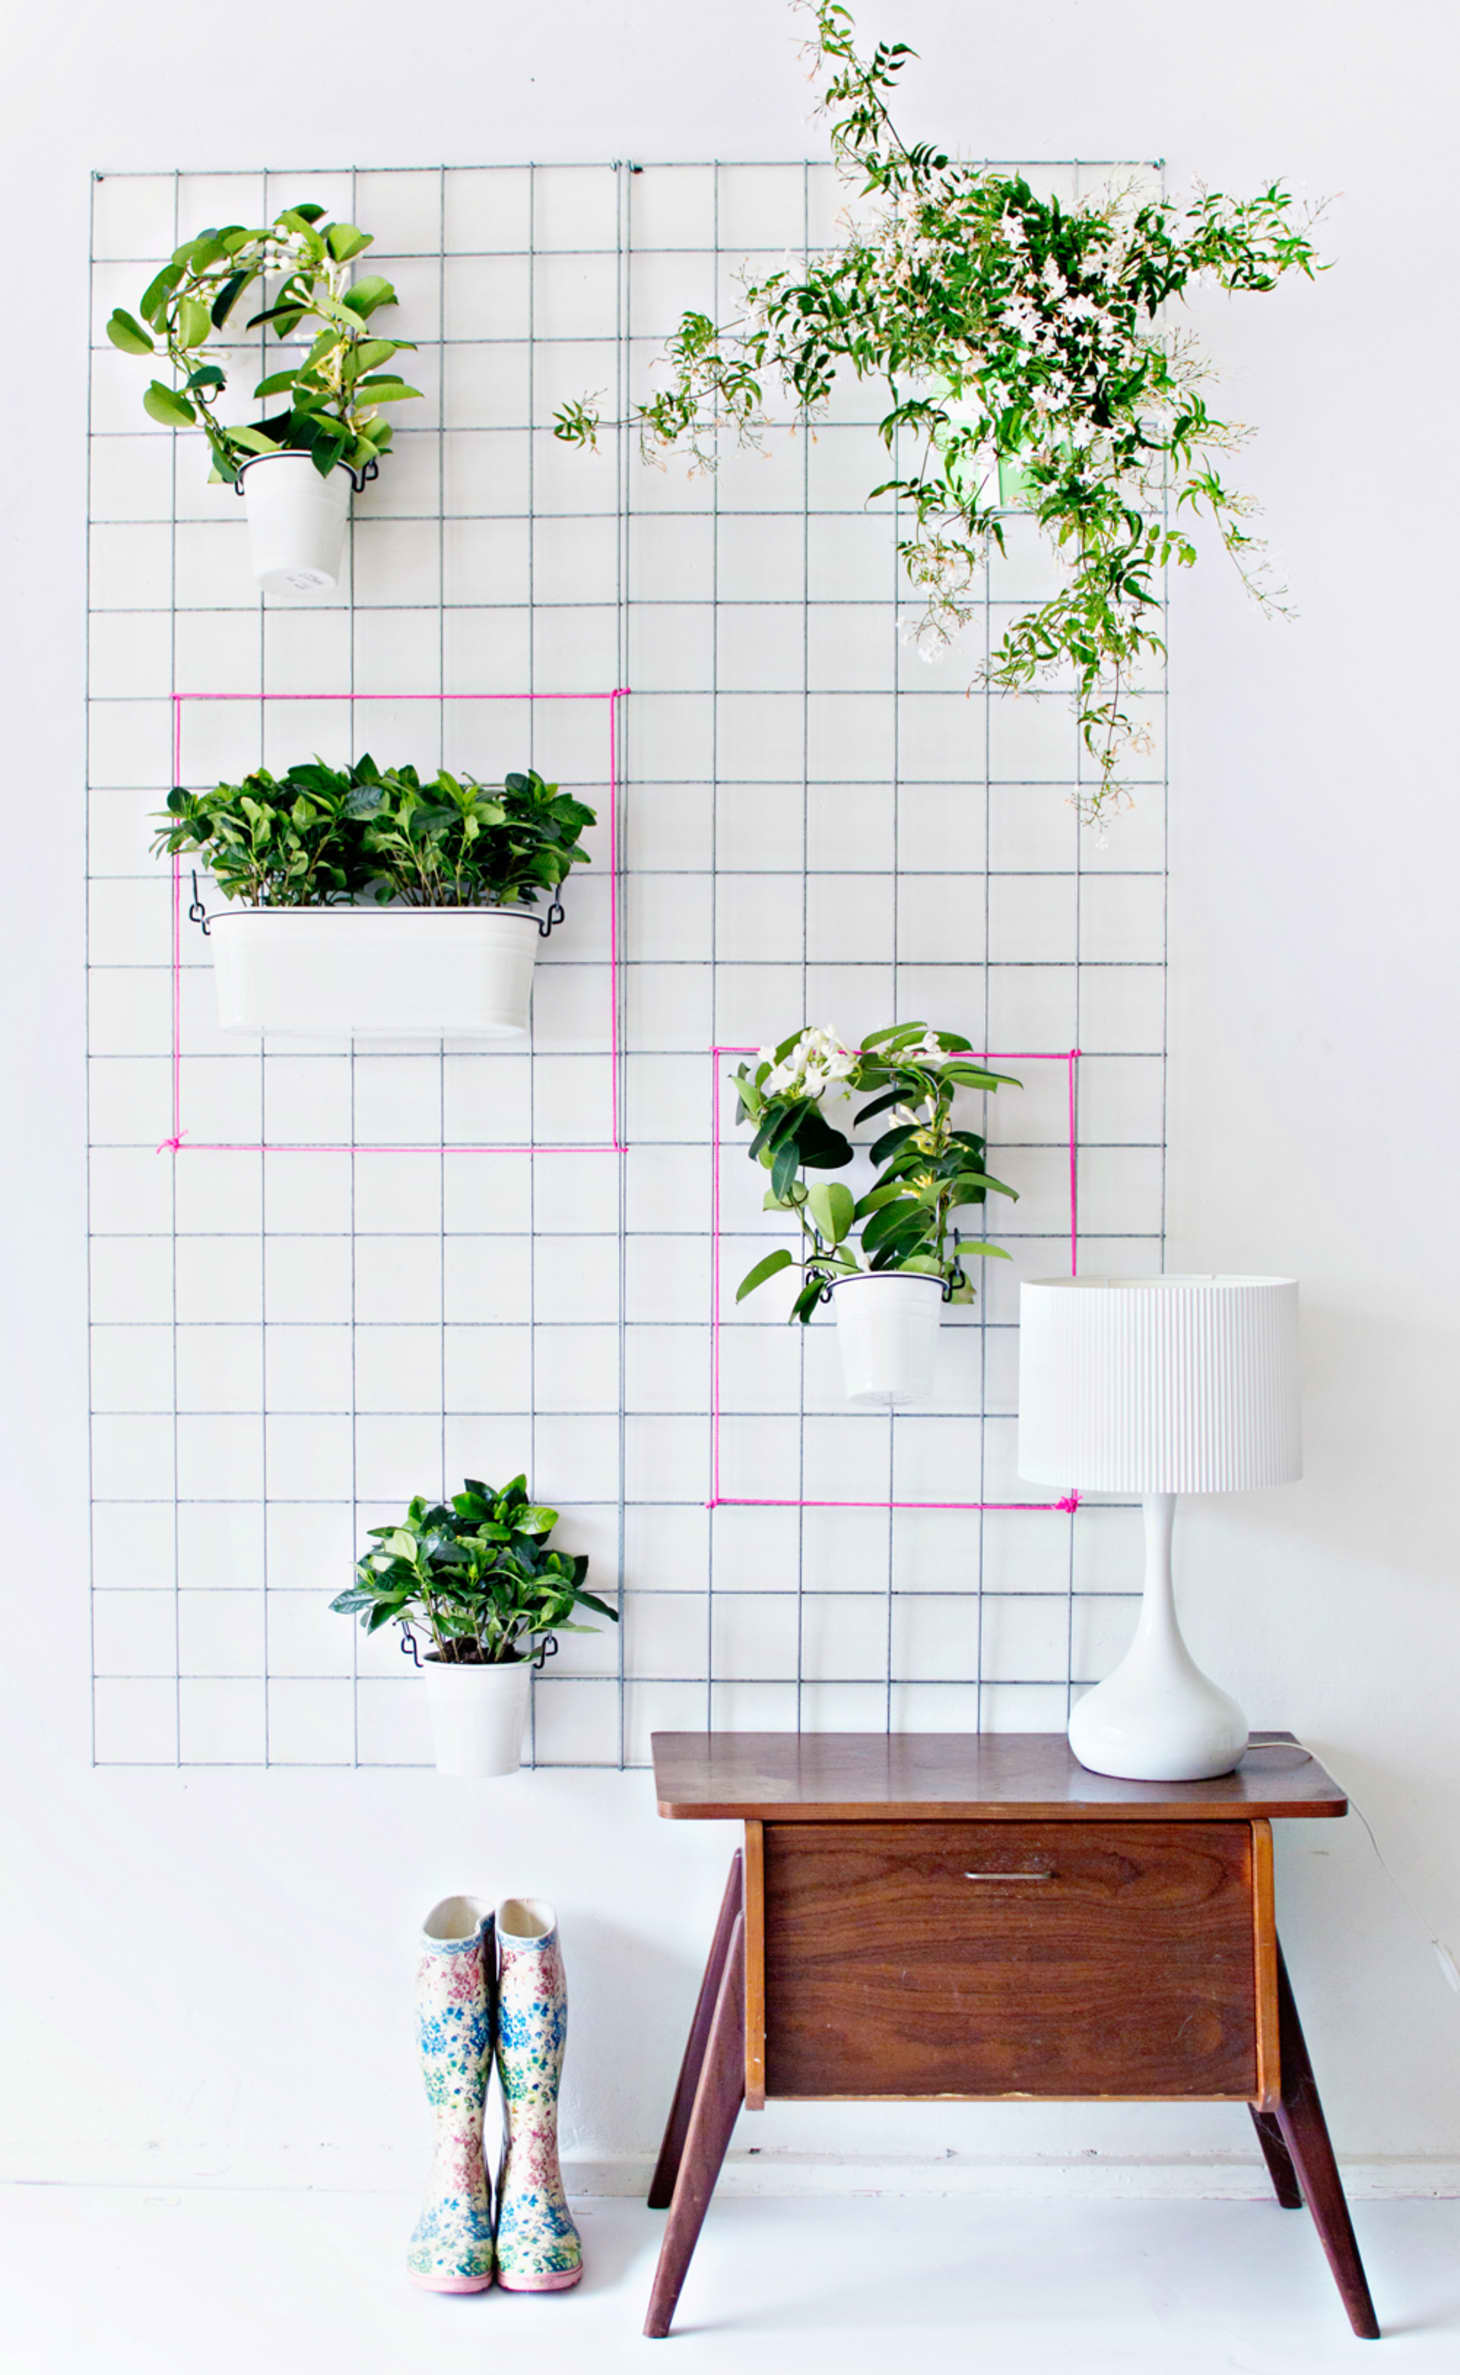 15 Indoor Garden Ideas for Wannabe Gardeners in Small Spaces